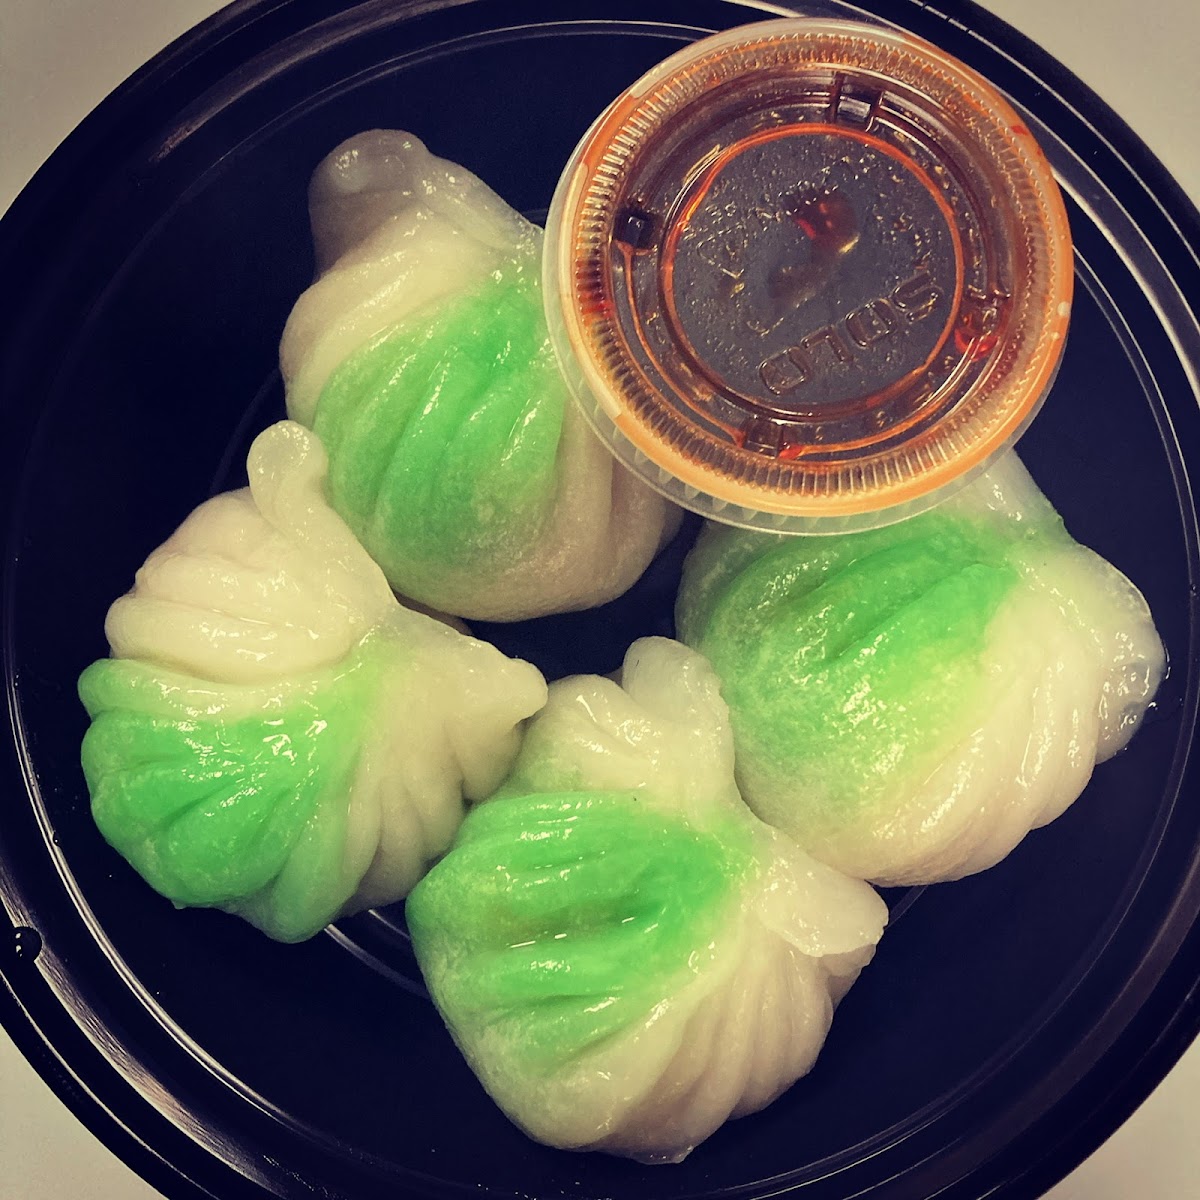 Steamed veggie dumplings. Made with rice flour - gluten free soy sauce available on the side